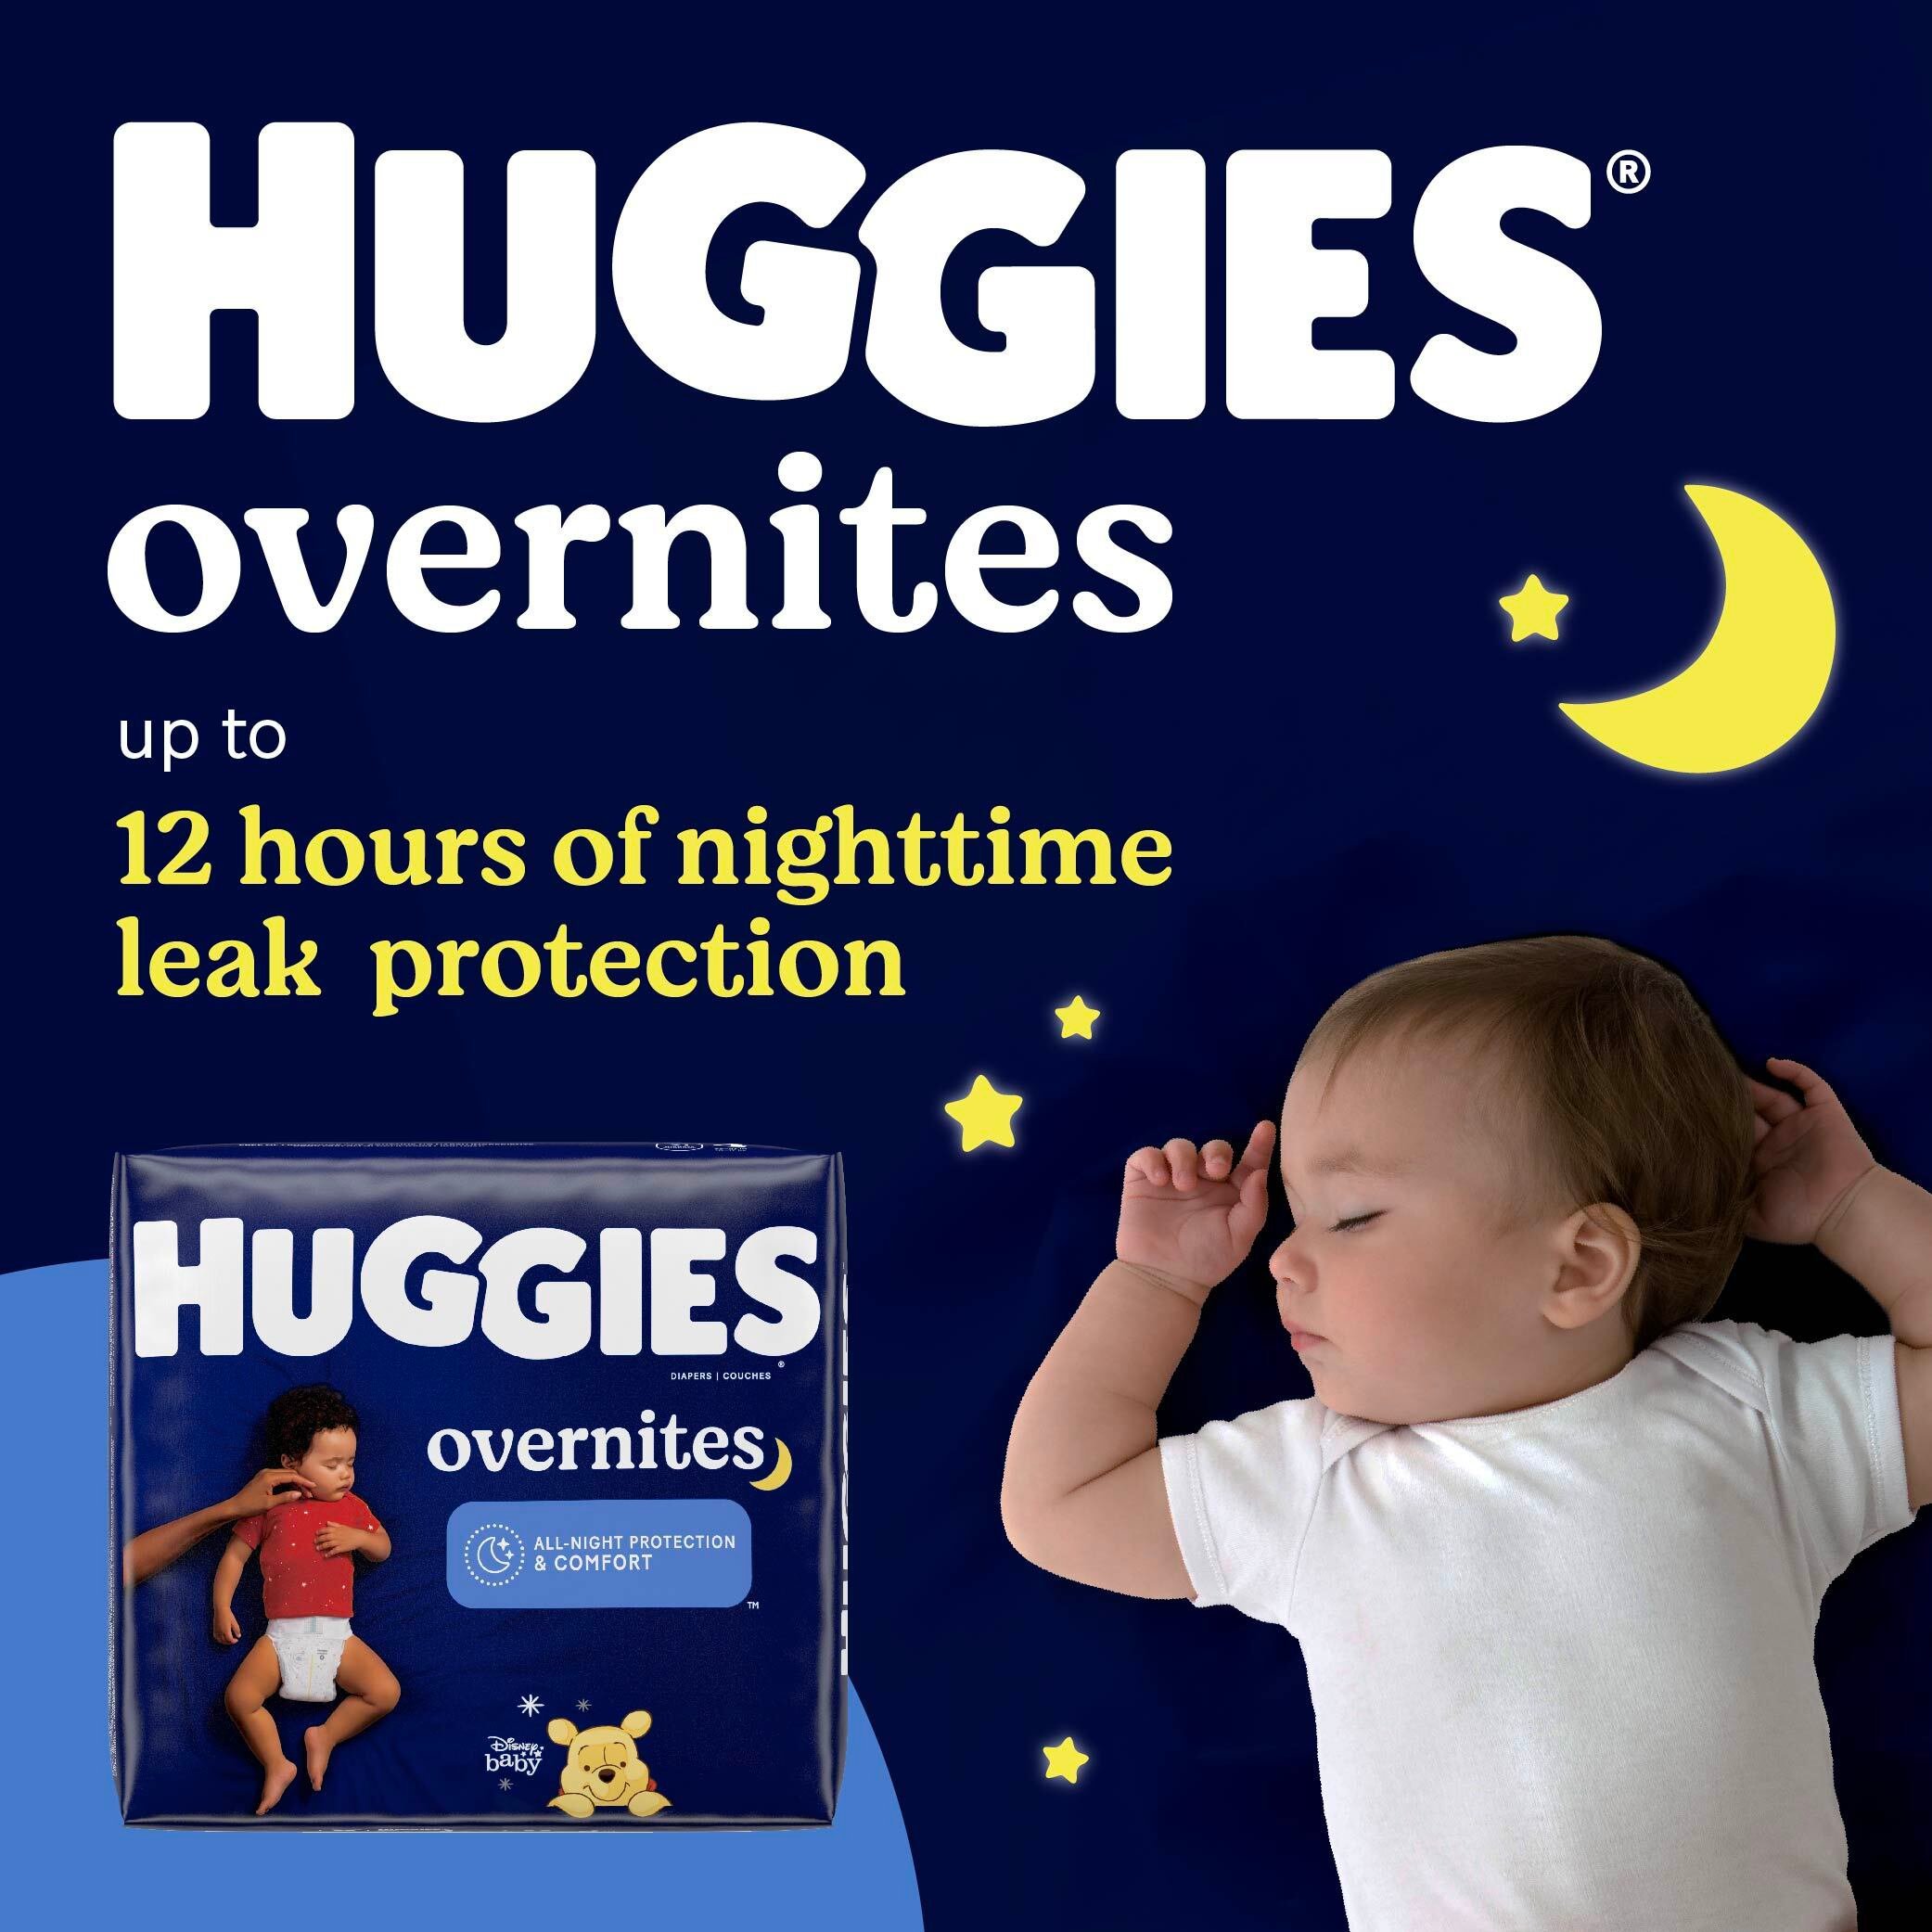 Huggies Little Snugglers Baby Diapers - Size 6 - Shop Diapers at H-E-B